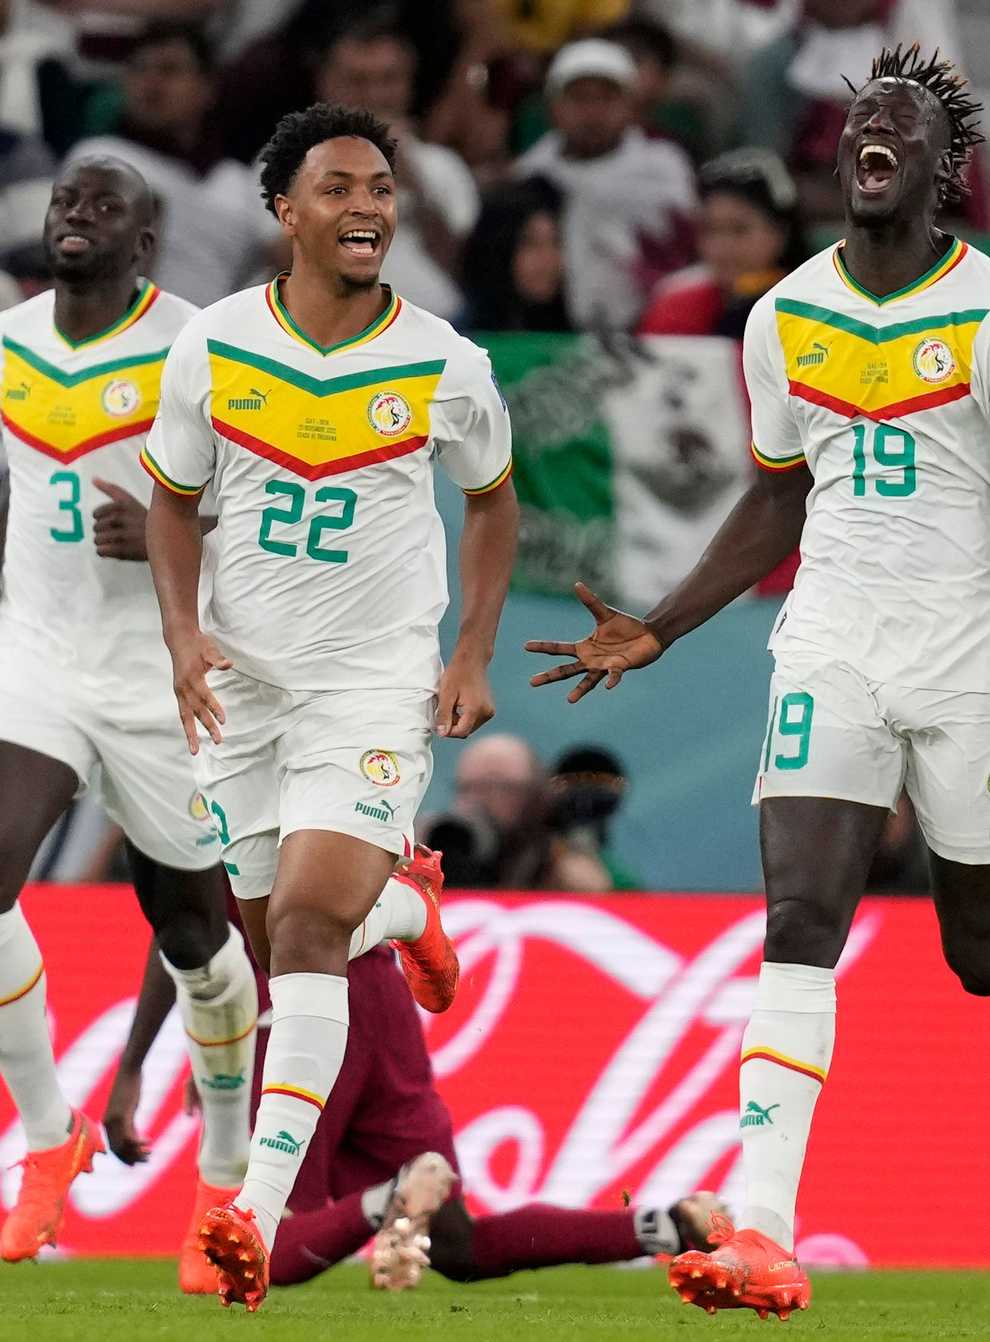 Senegal’s Famara Diedhiou, right, celebrates after scoring his side’s second goal against World Cup hosts Qatar (Thanassis Stavrakis/AP)